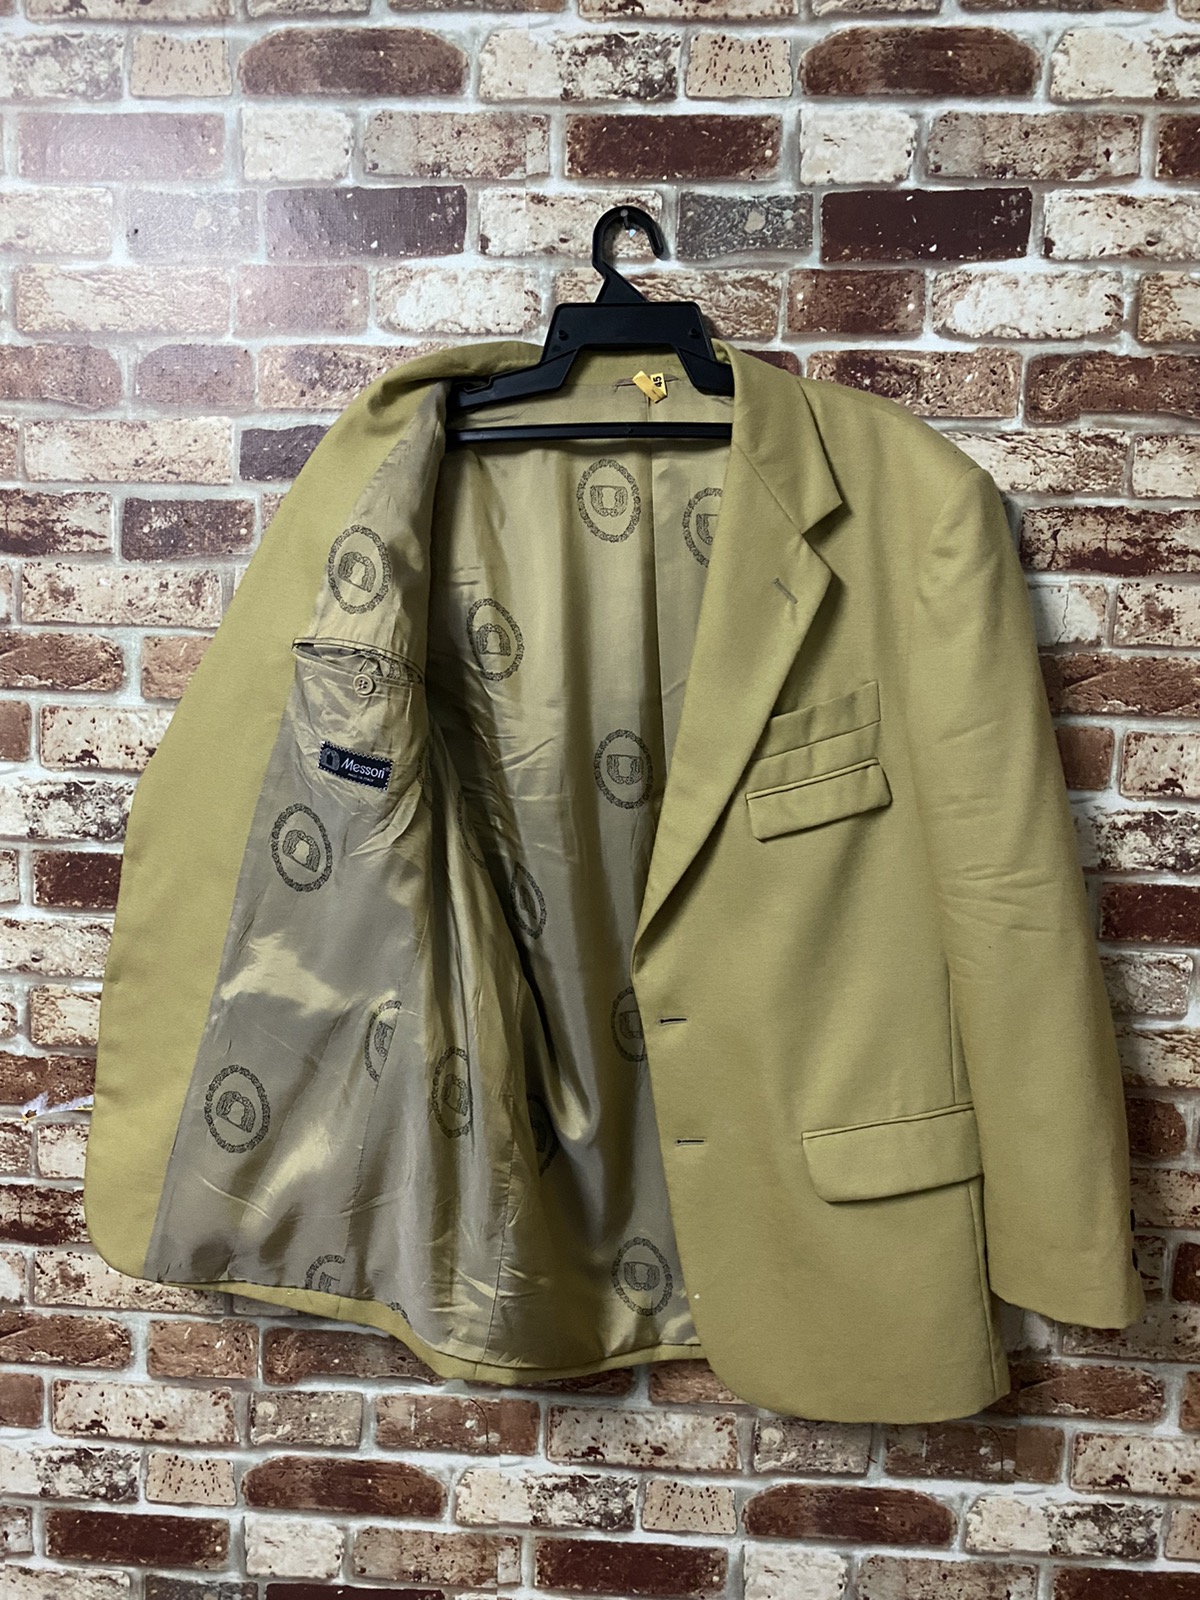 GK132 MESSORI MADE IN ITALY JACKET - 2